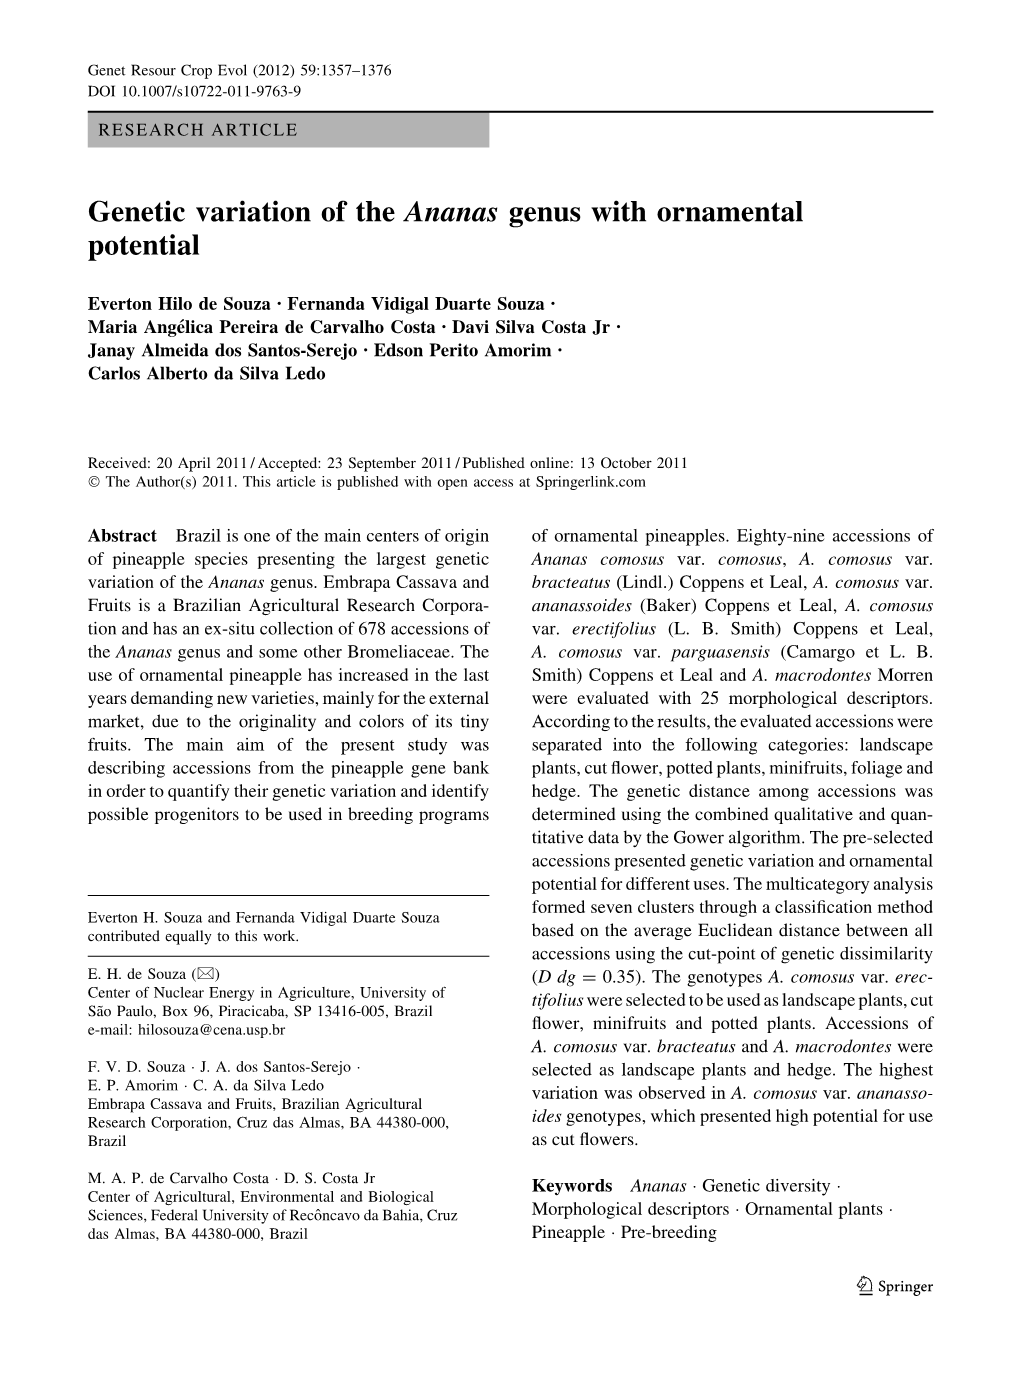 Genetic Variation of the Ananas Genus with Ornamental Potential